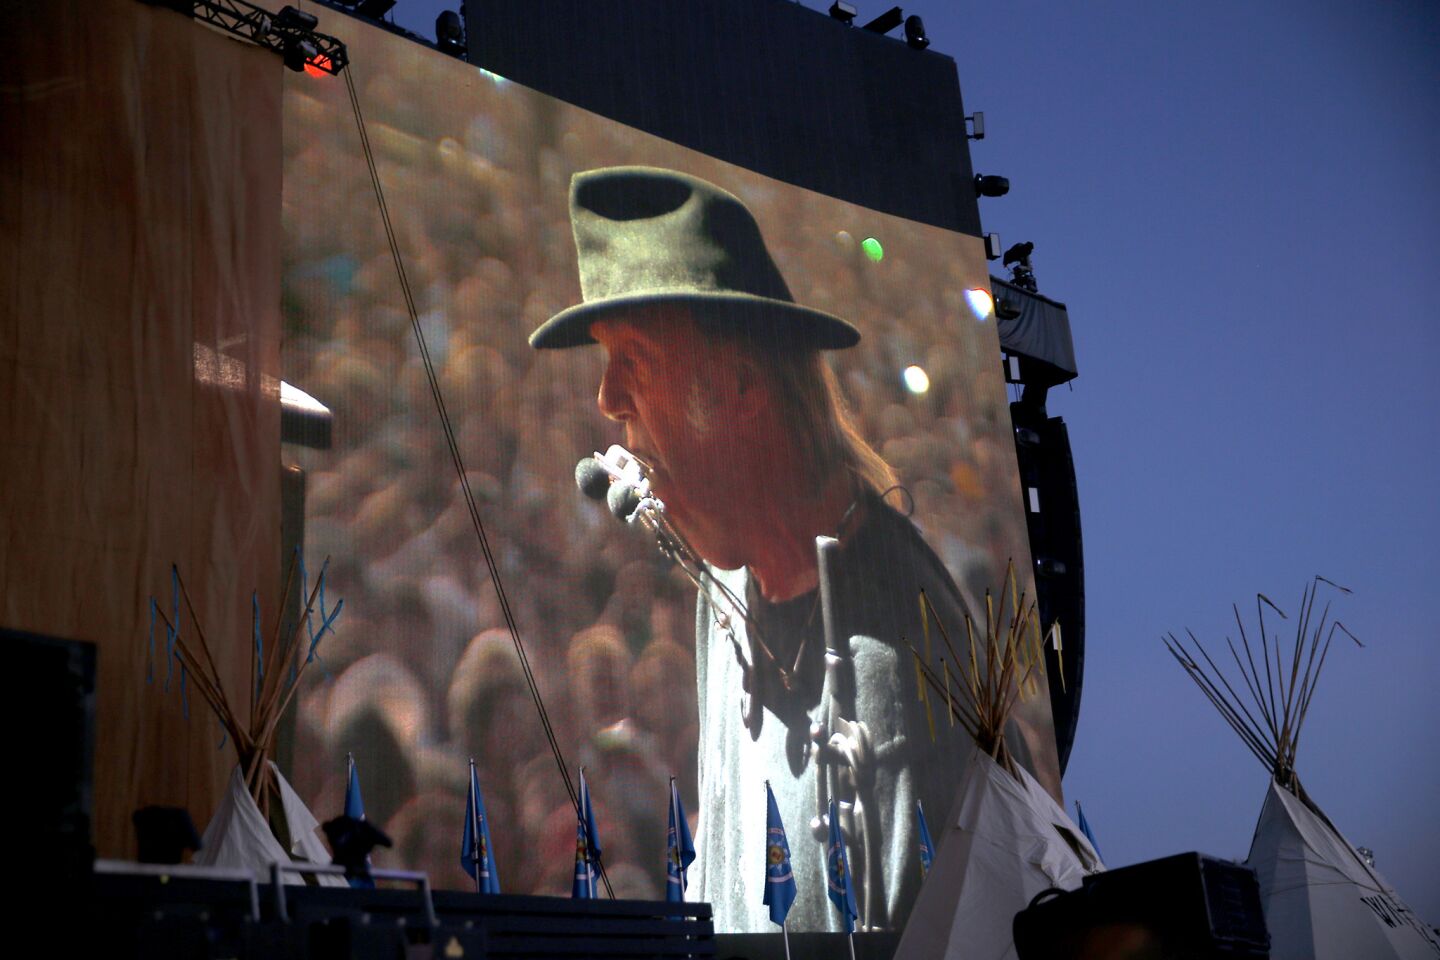 Neil Young is projected on a big screen performing near a teepee on the second day of the three-day Desert Trip.